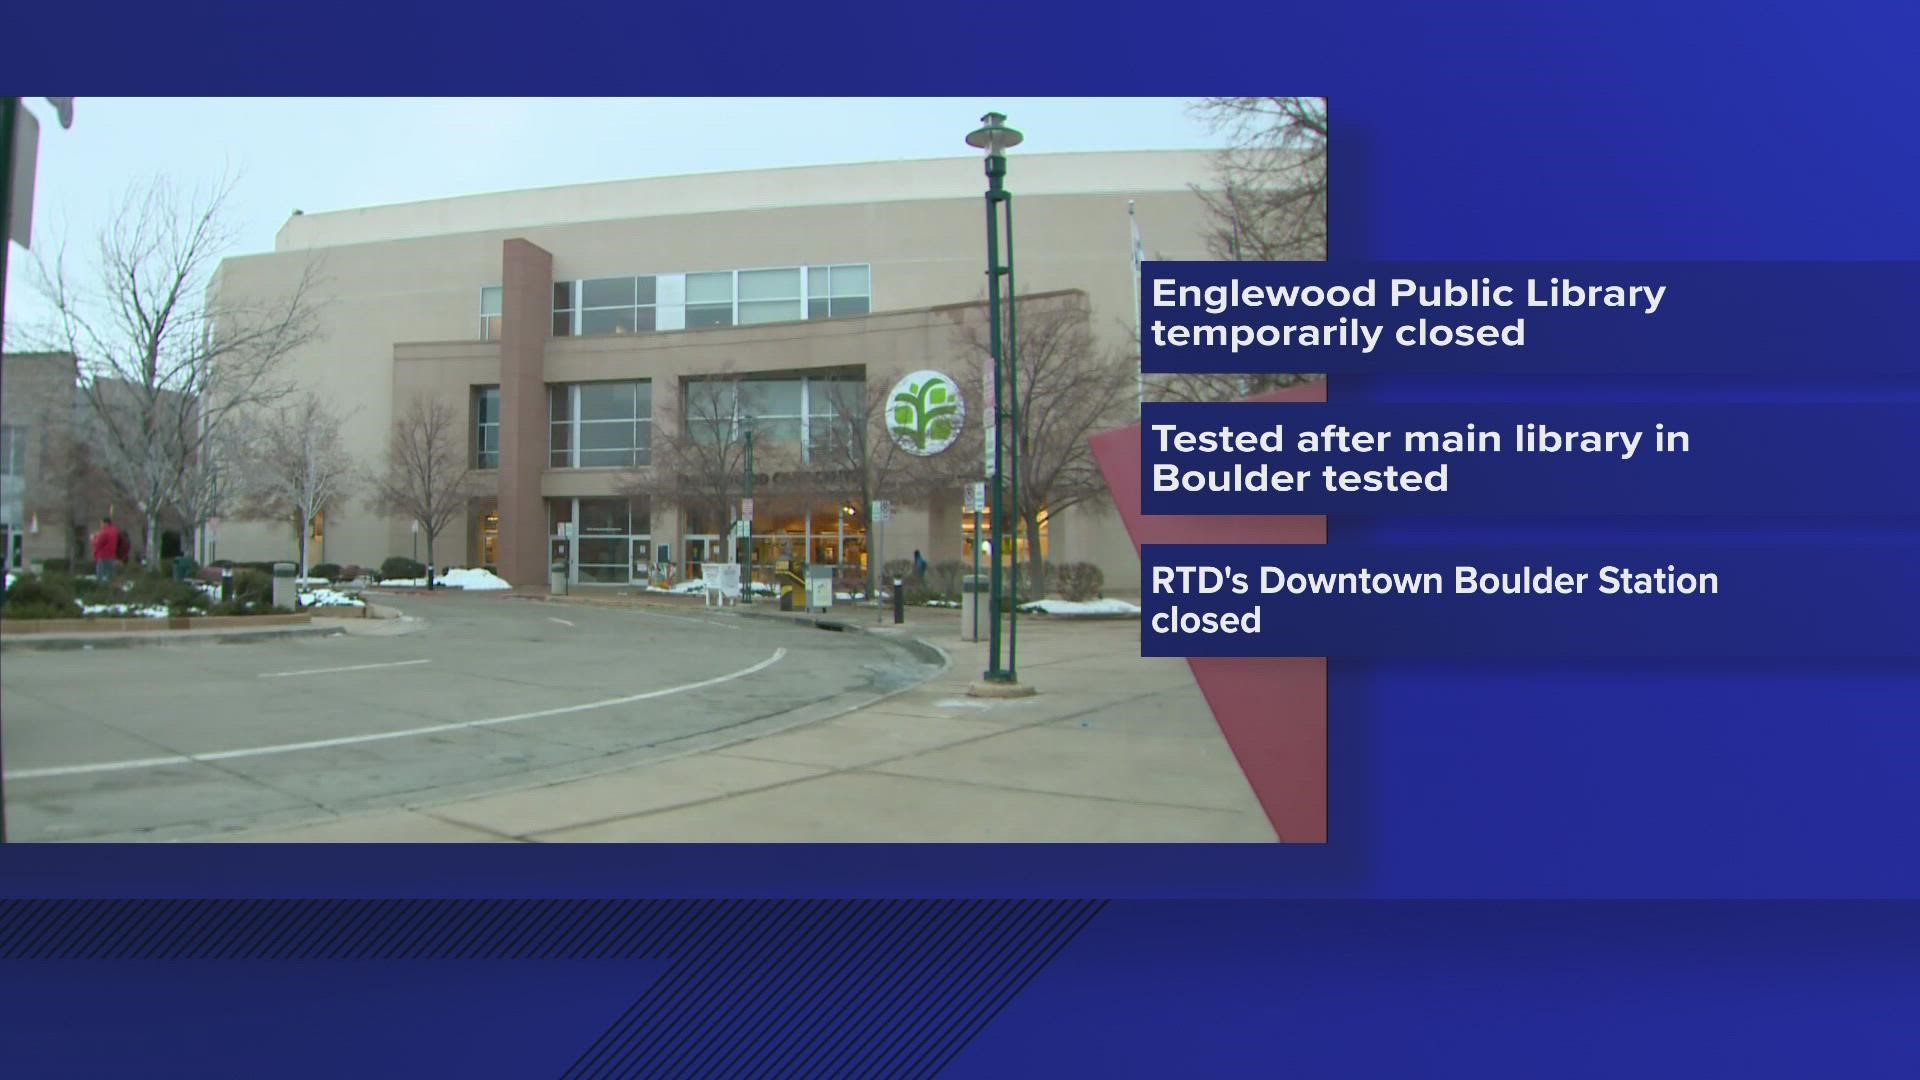 The closure comes after the main library in Boulder also temporarily closed due to meth contamination.